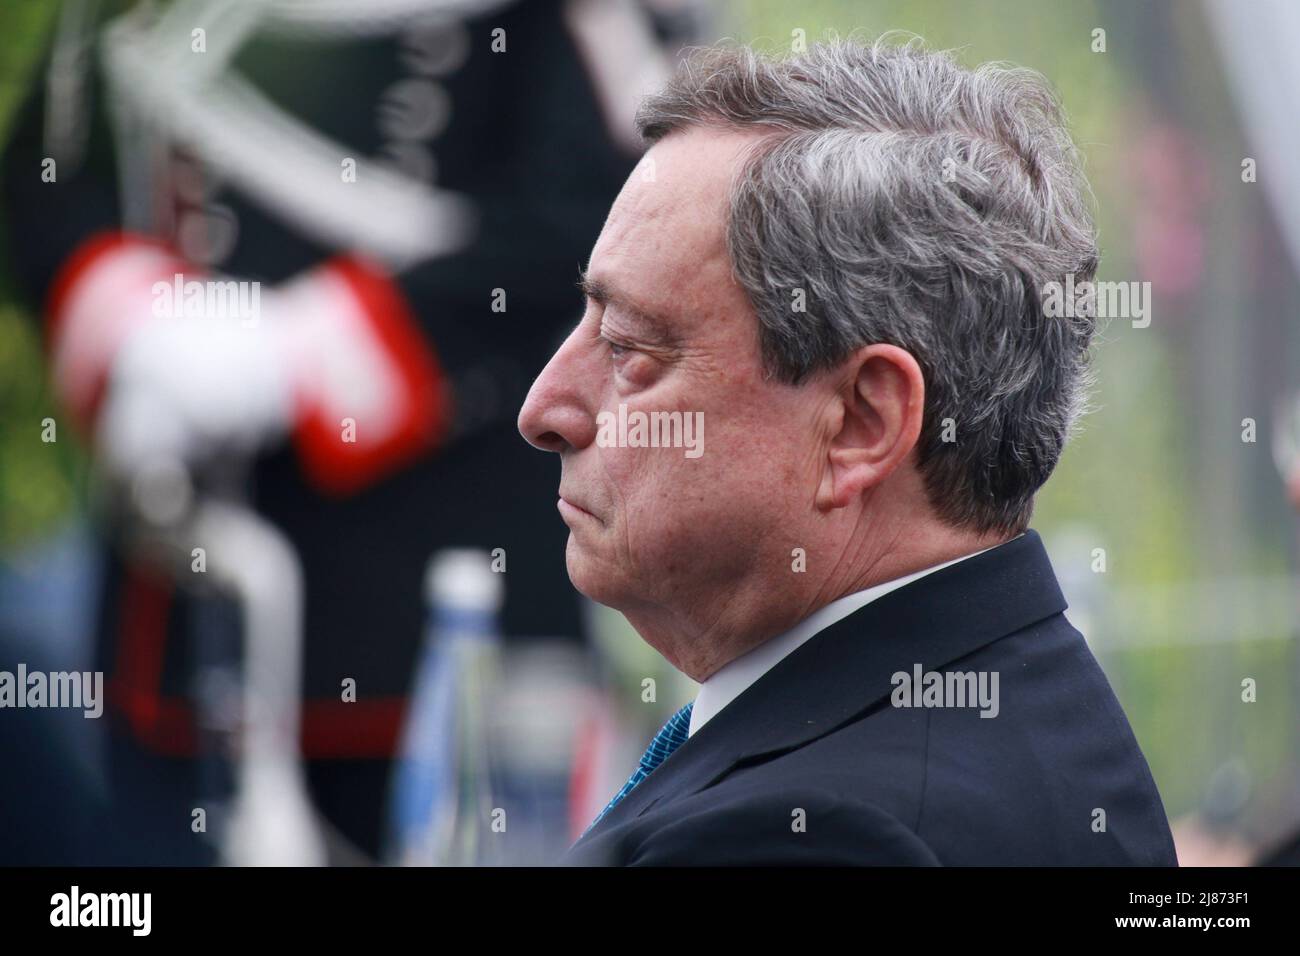 Sorrento, Italy. 13 May, 2022. Italian Prime Minister Mario Draghi at the 1st edition of ”Verso Sud” organized by the European House - Ambrosetti in Sorrento, Naples Italy on 13 May 2022. Credit:Franco Romano/Alamy Live News Stock Photo